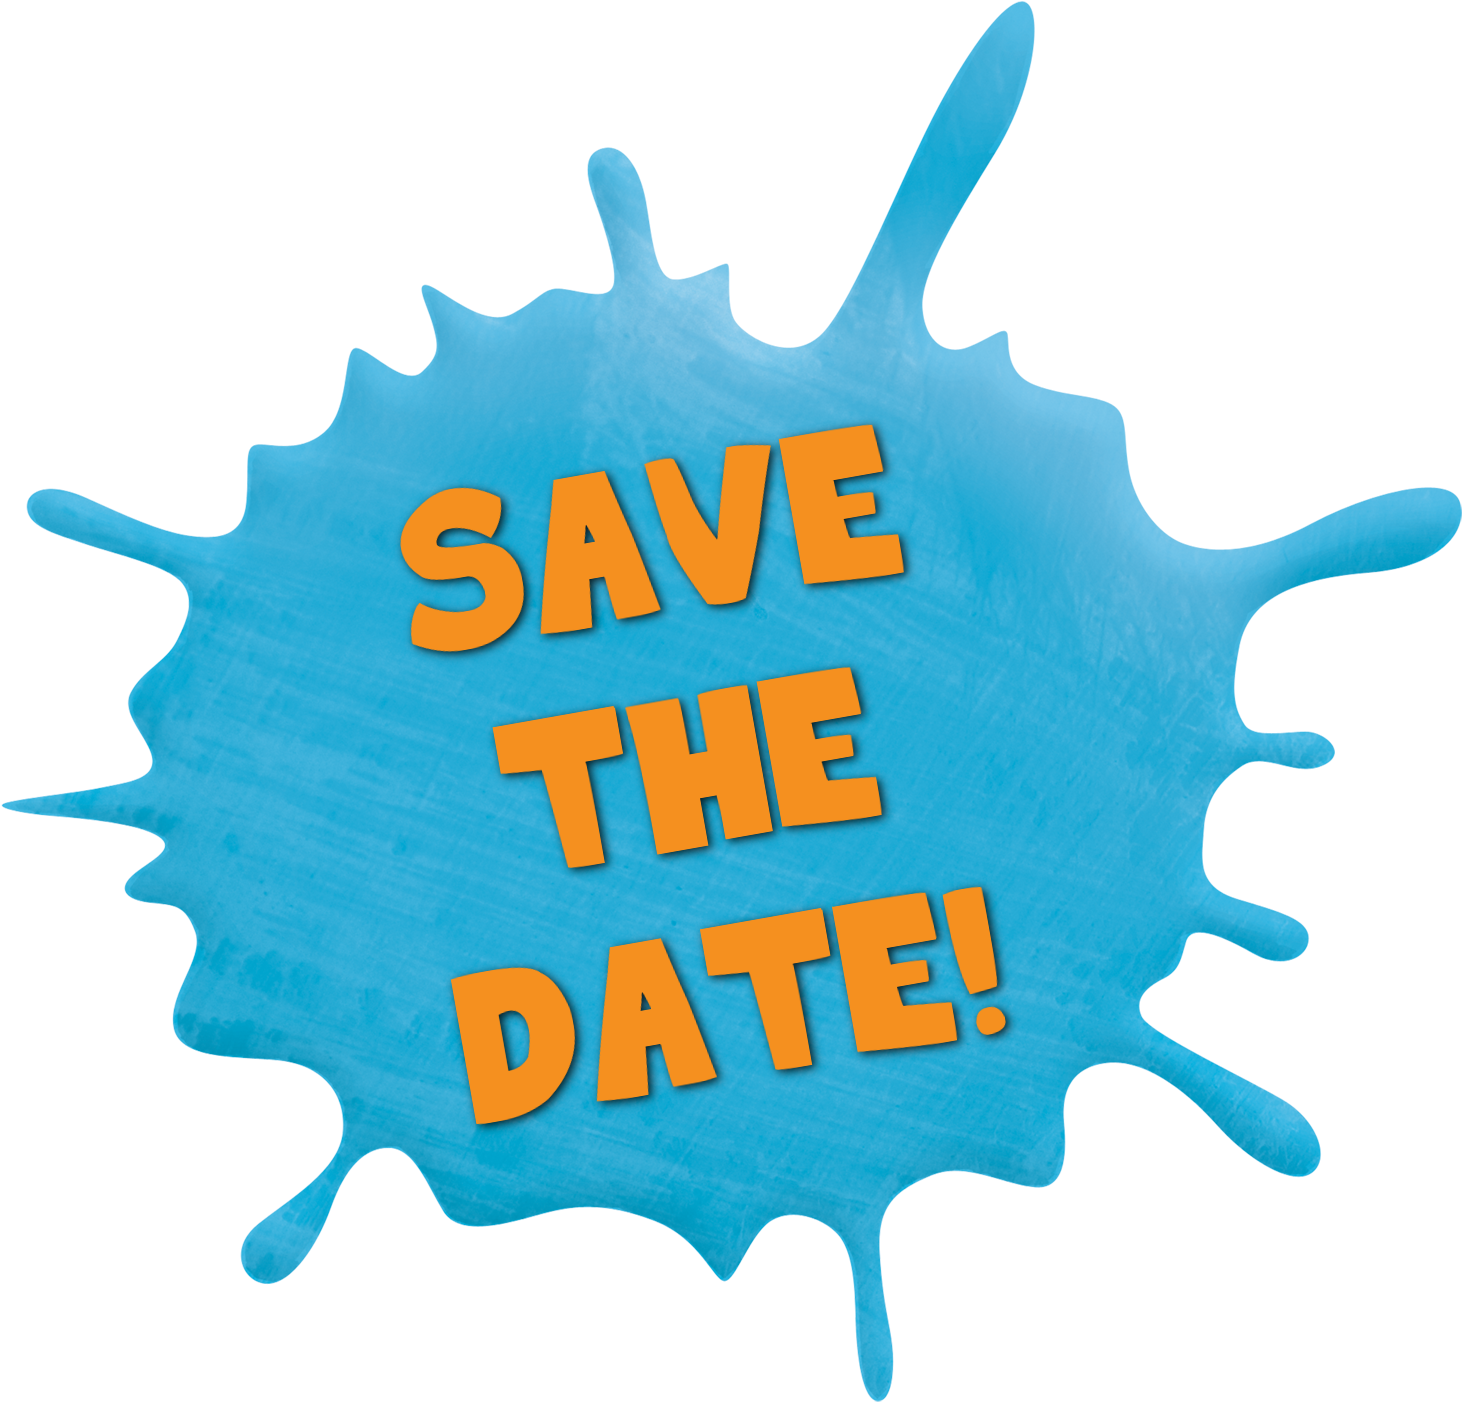 Save The Date Announcement Splash PNG image